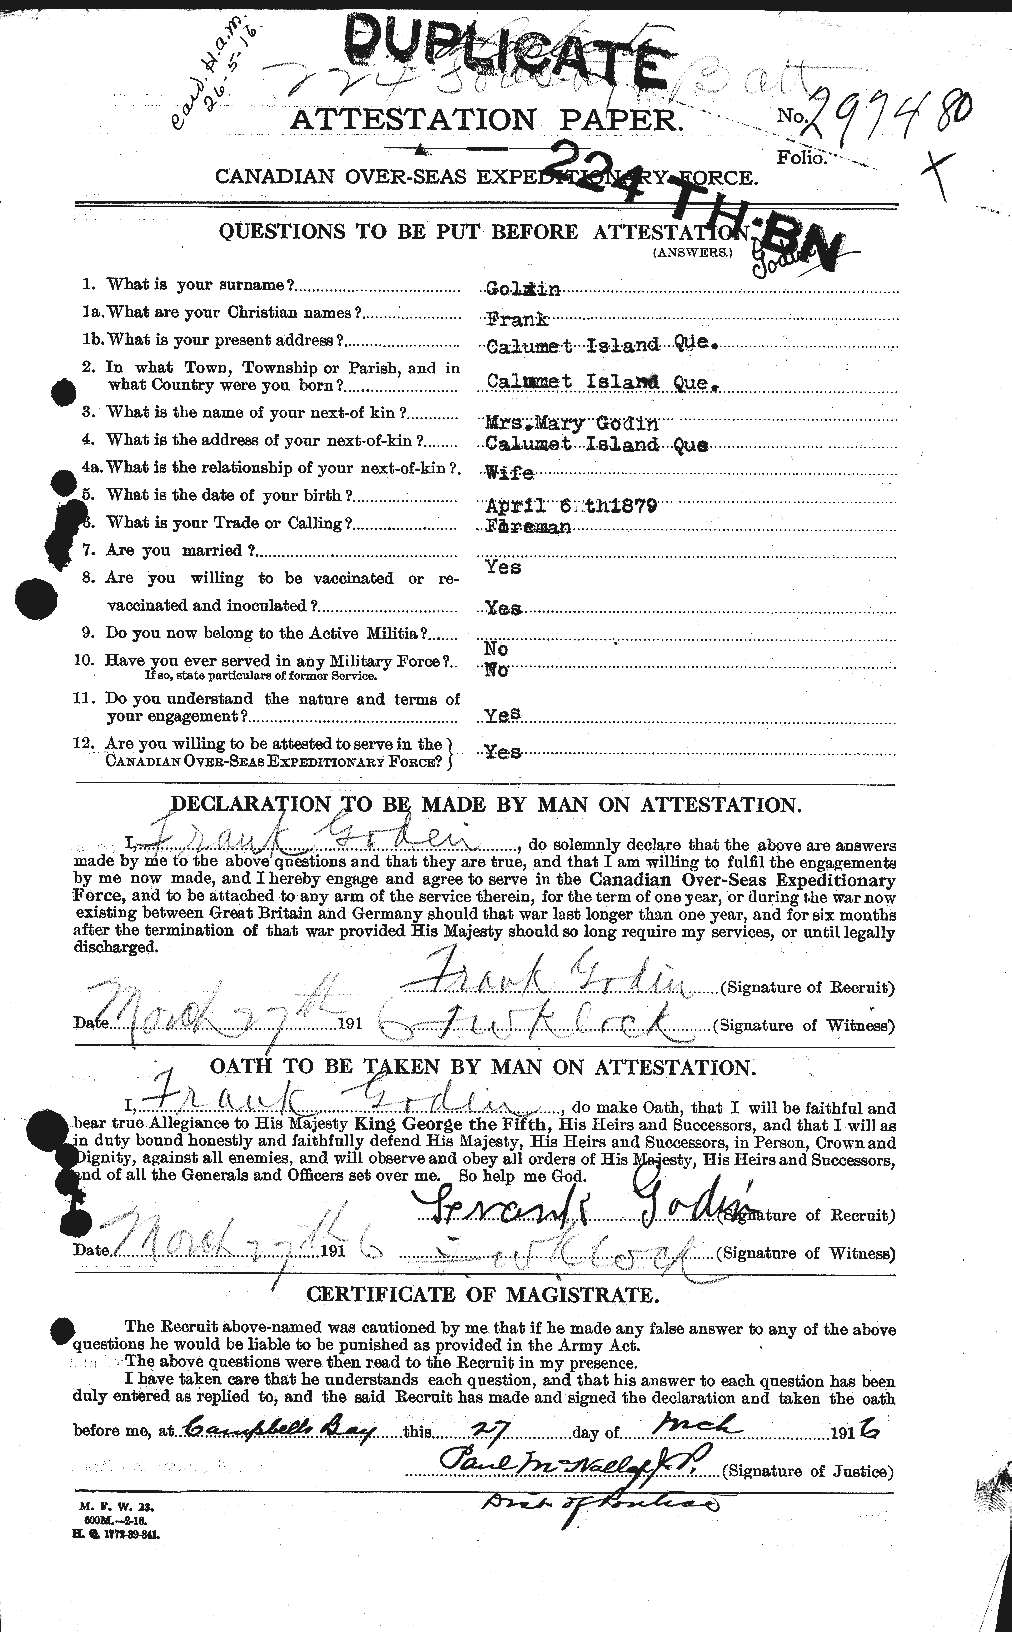 Personnel Records of the First World War - CEF 354518a